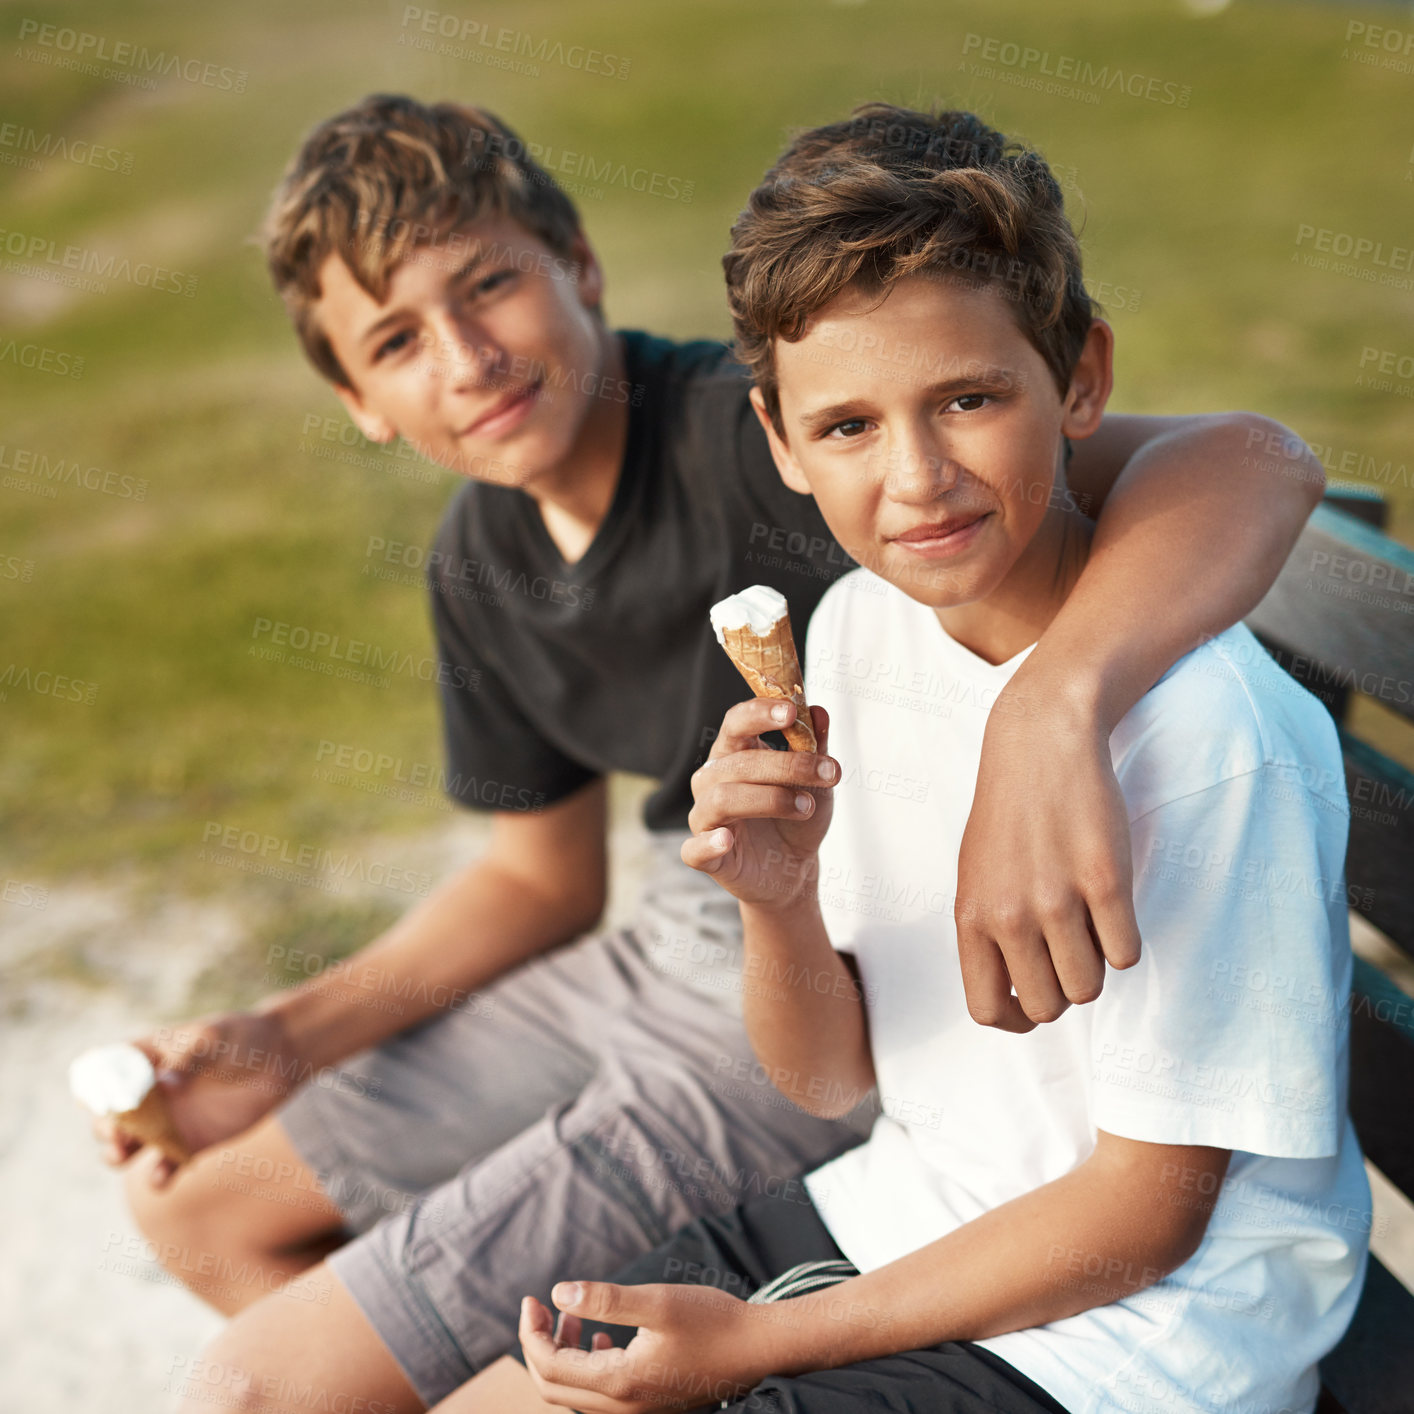 Buy stock photo Portrait of two happy brothers eating ice-cream cones while sitting on a bench by the beach